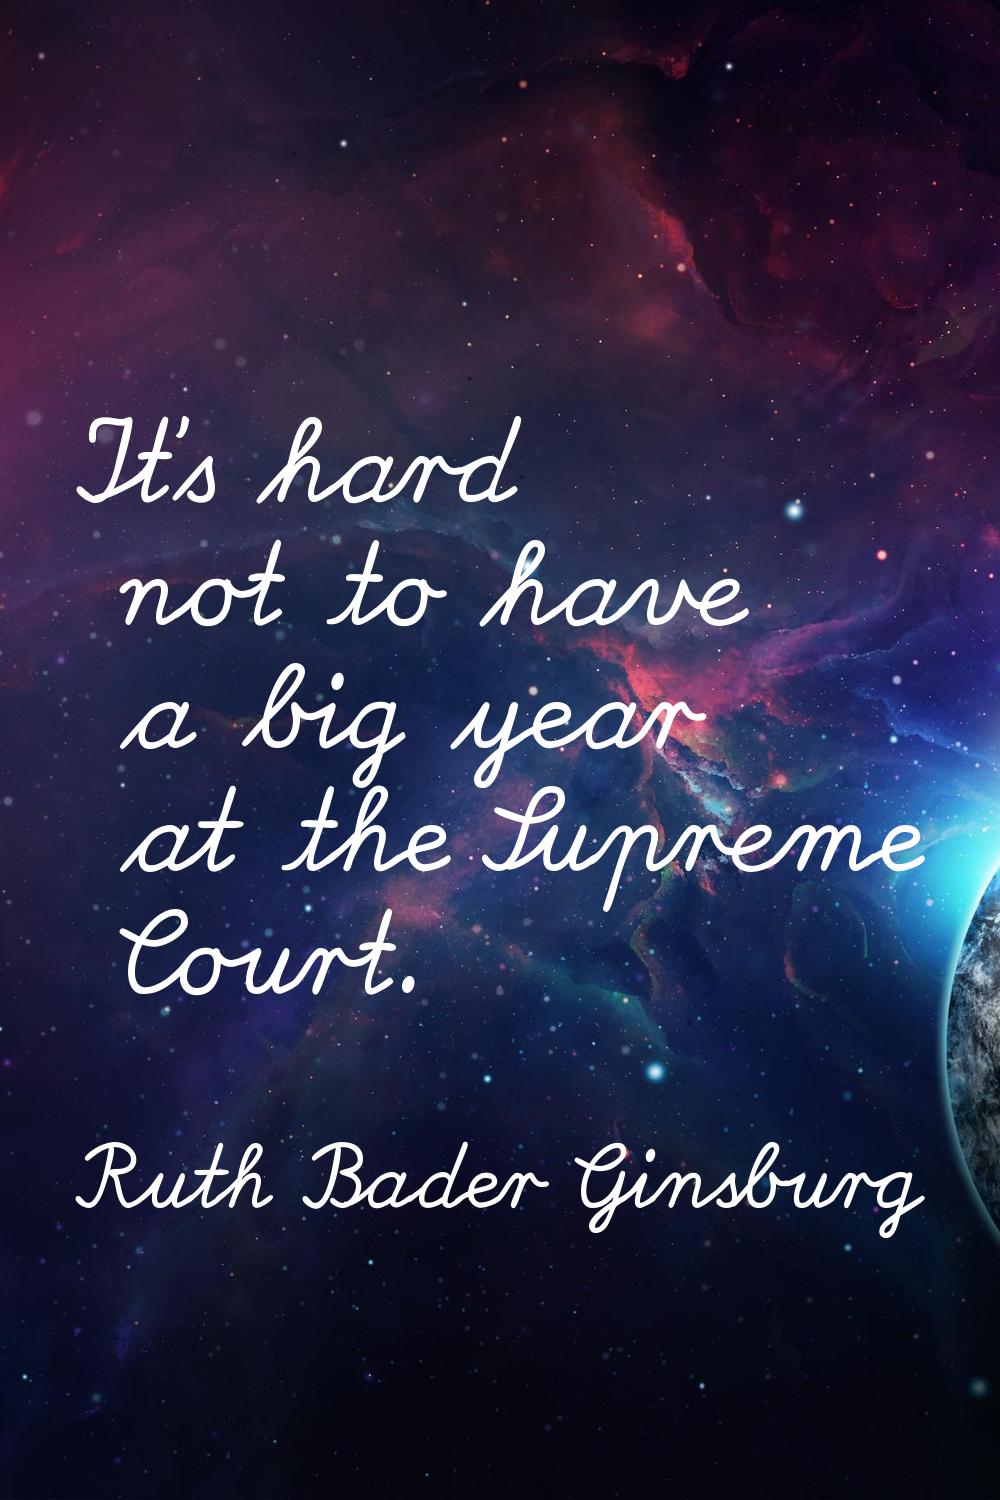 It's hard not to have a big year at the Supreme Court.